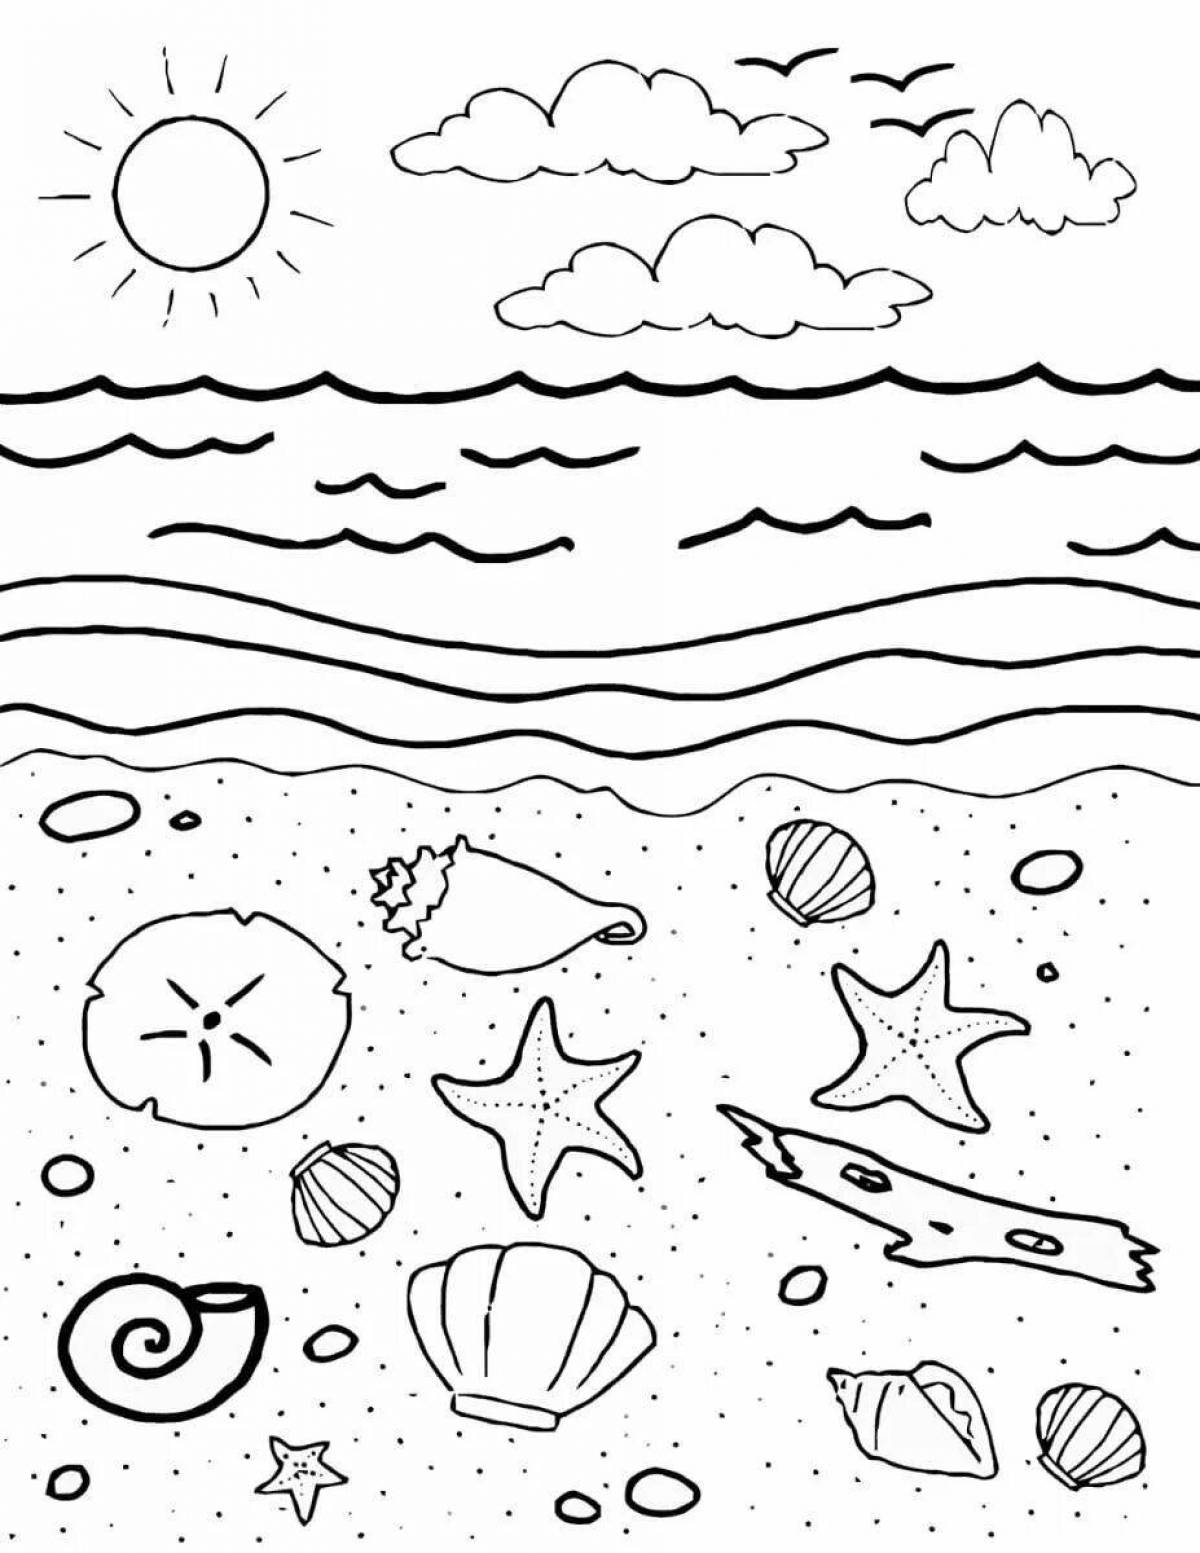 Refreshing blue ocean coloring page